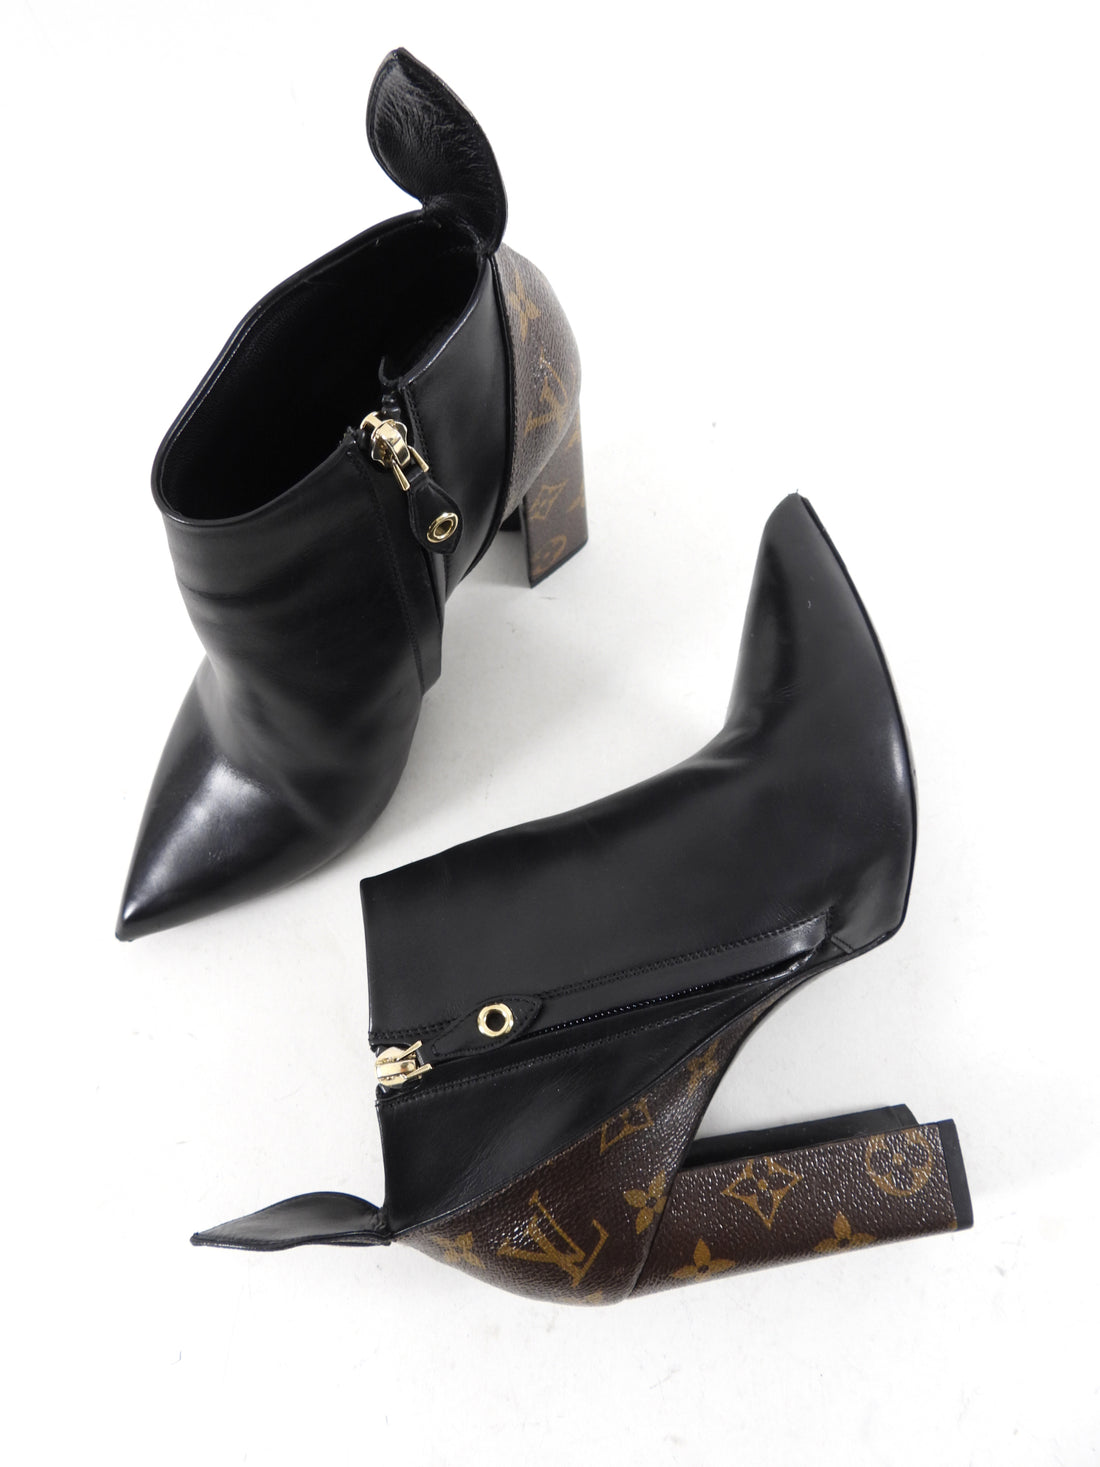 Louis Vuitton Matchmake Ankle Boots